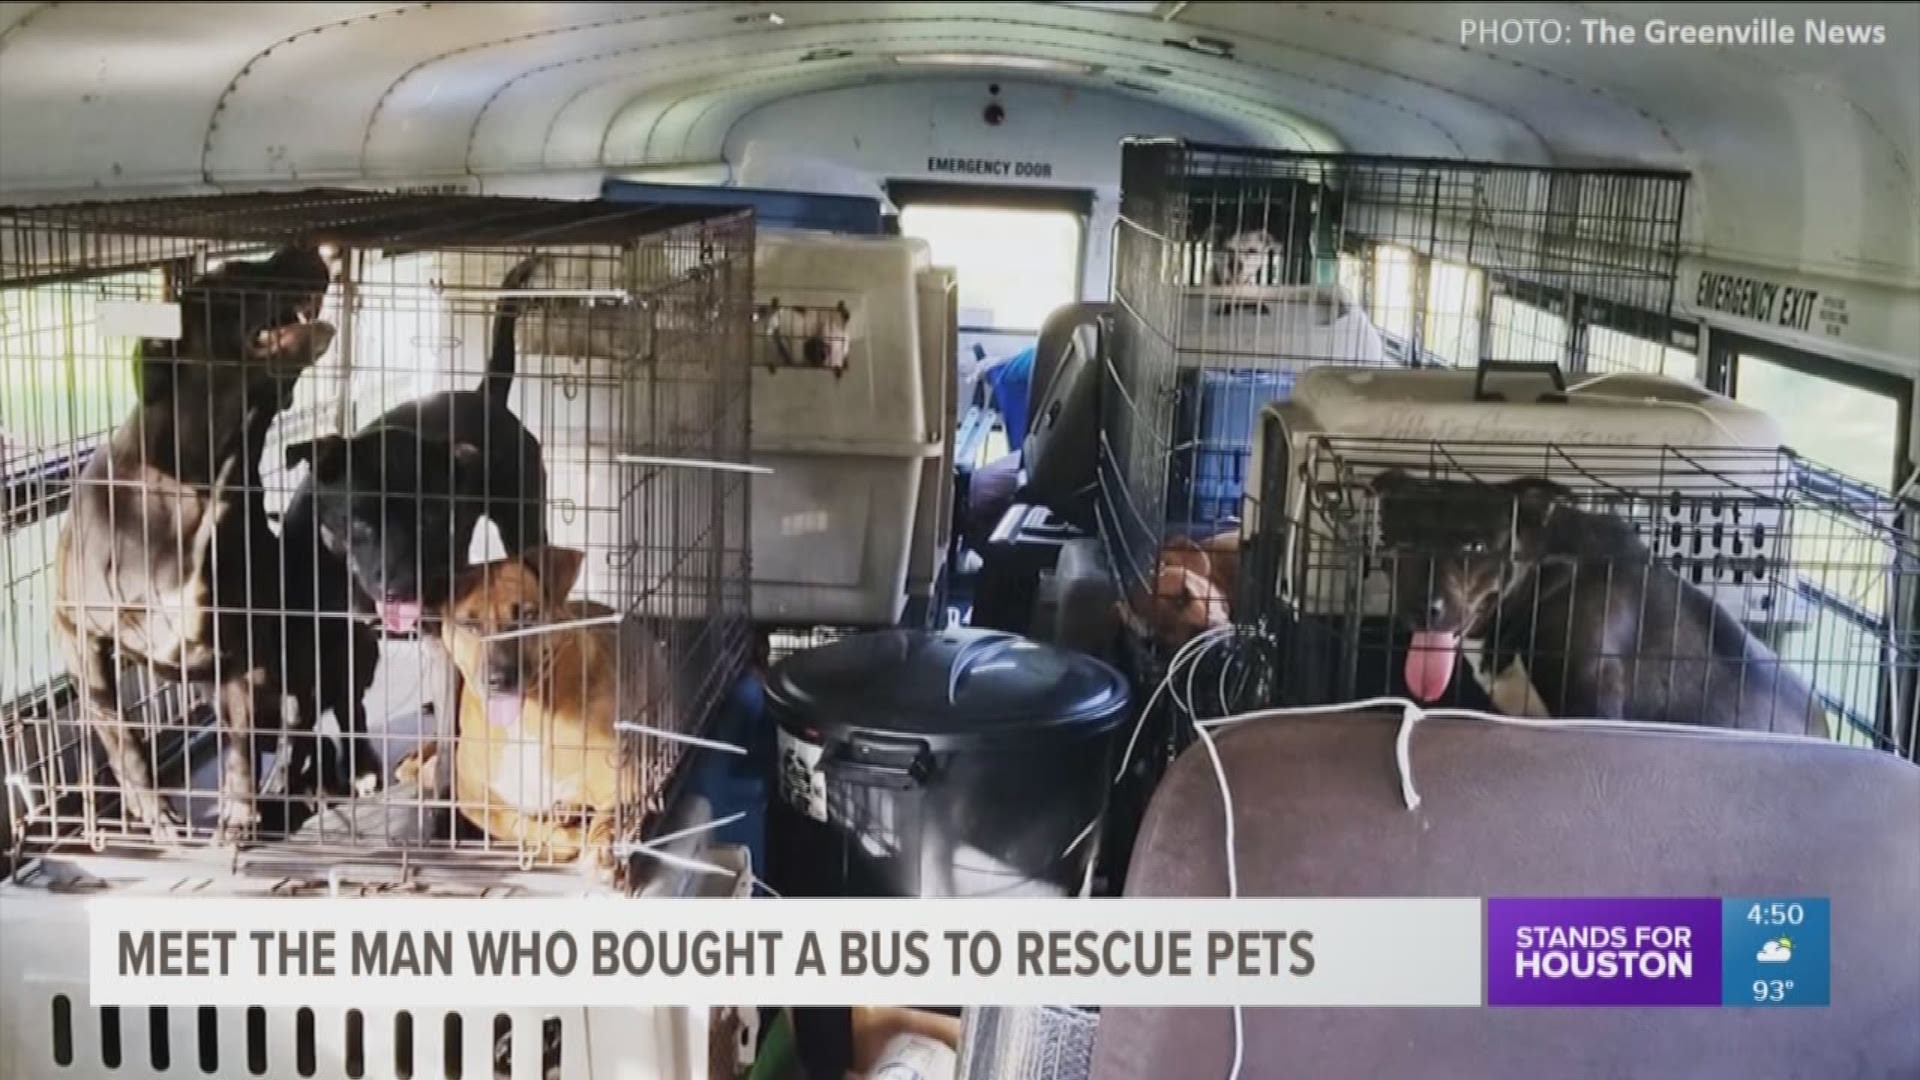 In the wake of Florence one animal lover is going above and beyond to make sure homeless pets aren't left behind. A trucker named Tony bought a school bus and filled it with cats and dogs from shelters in the storm zone. 